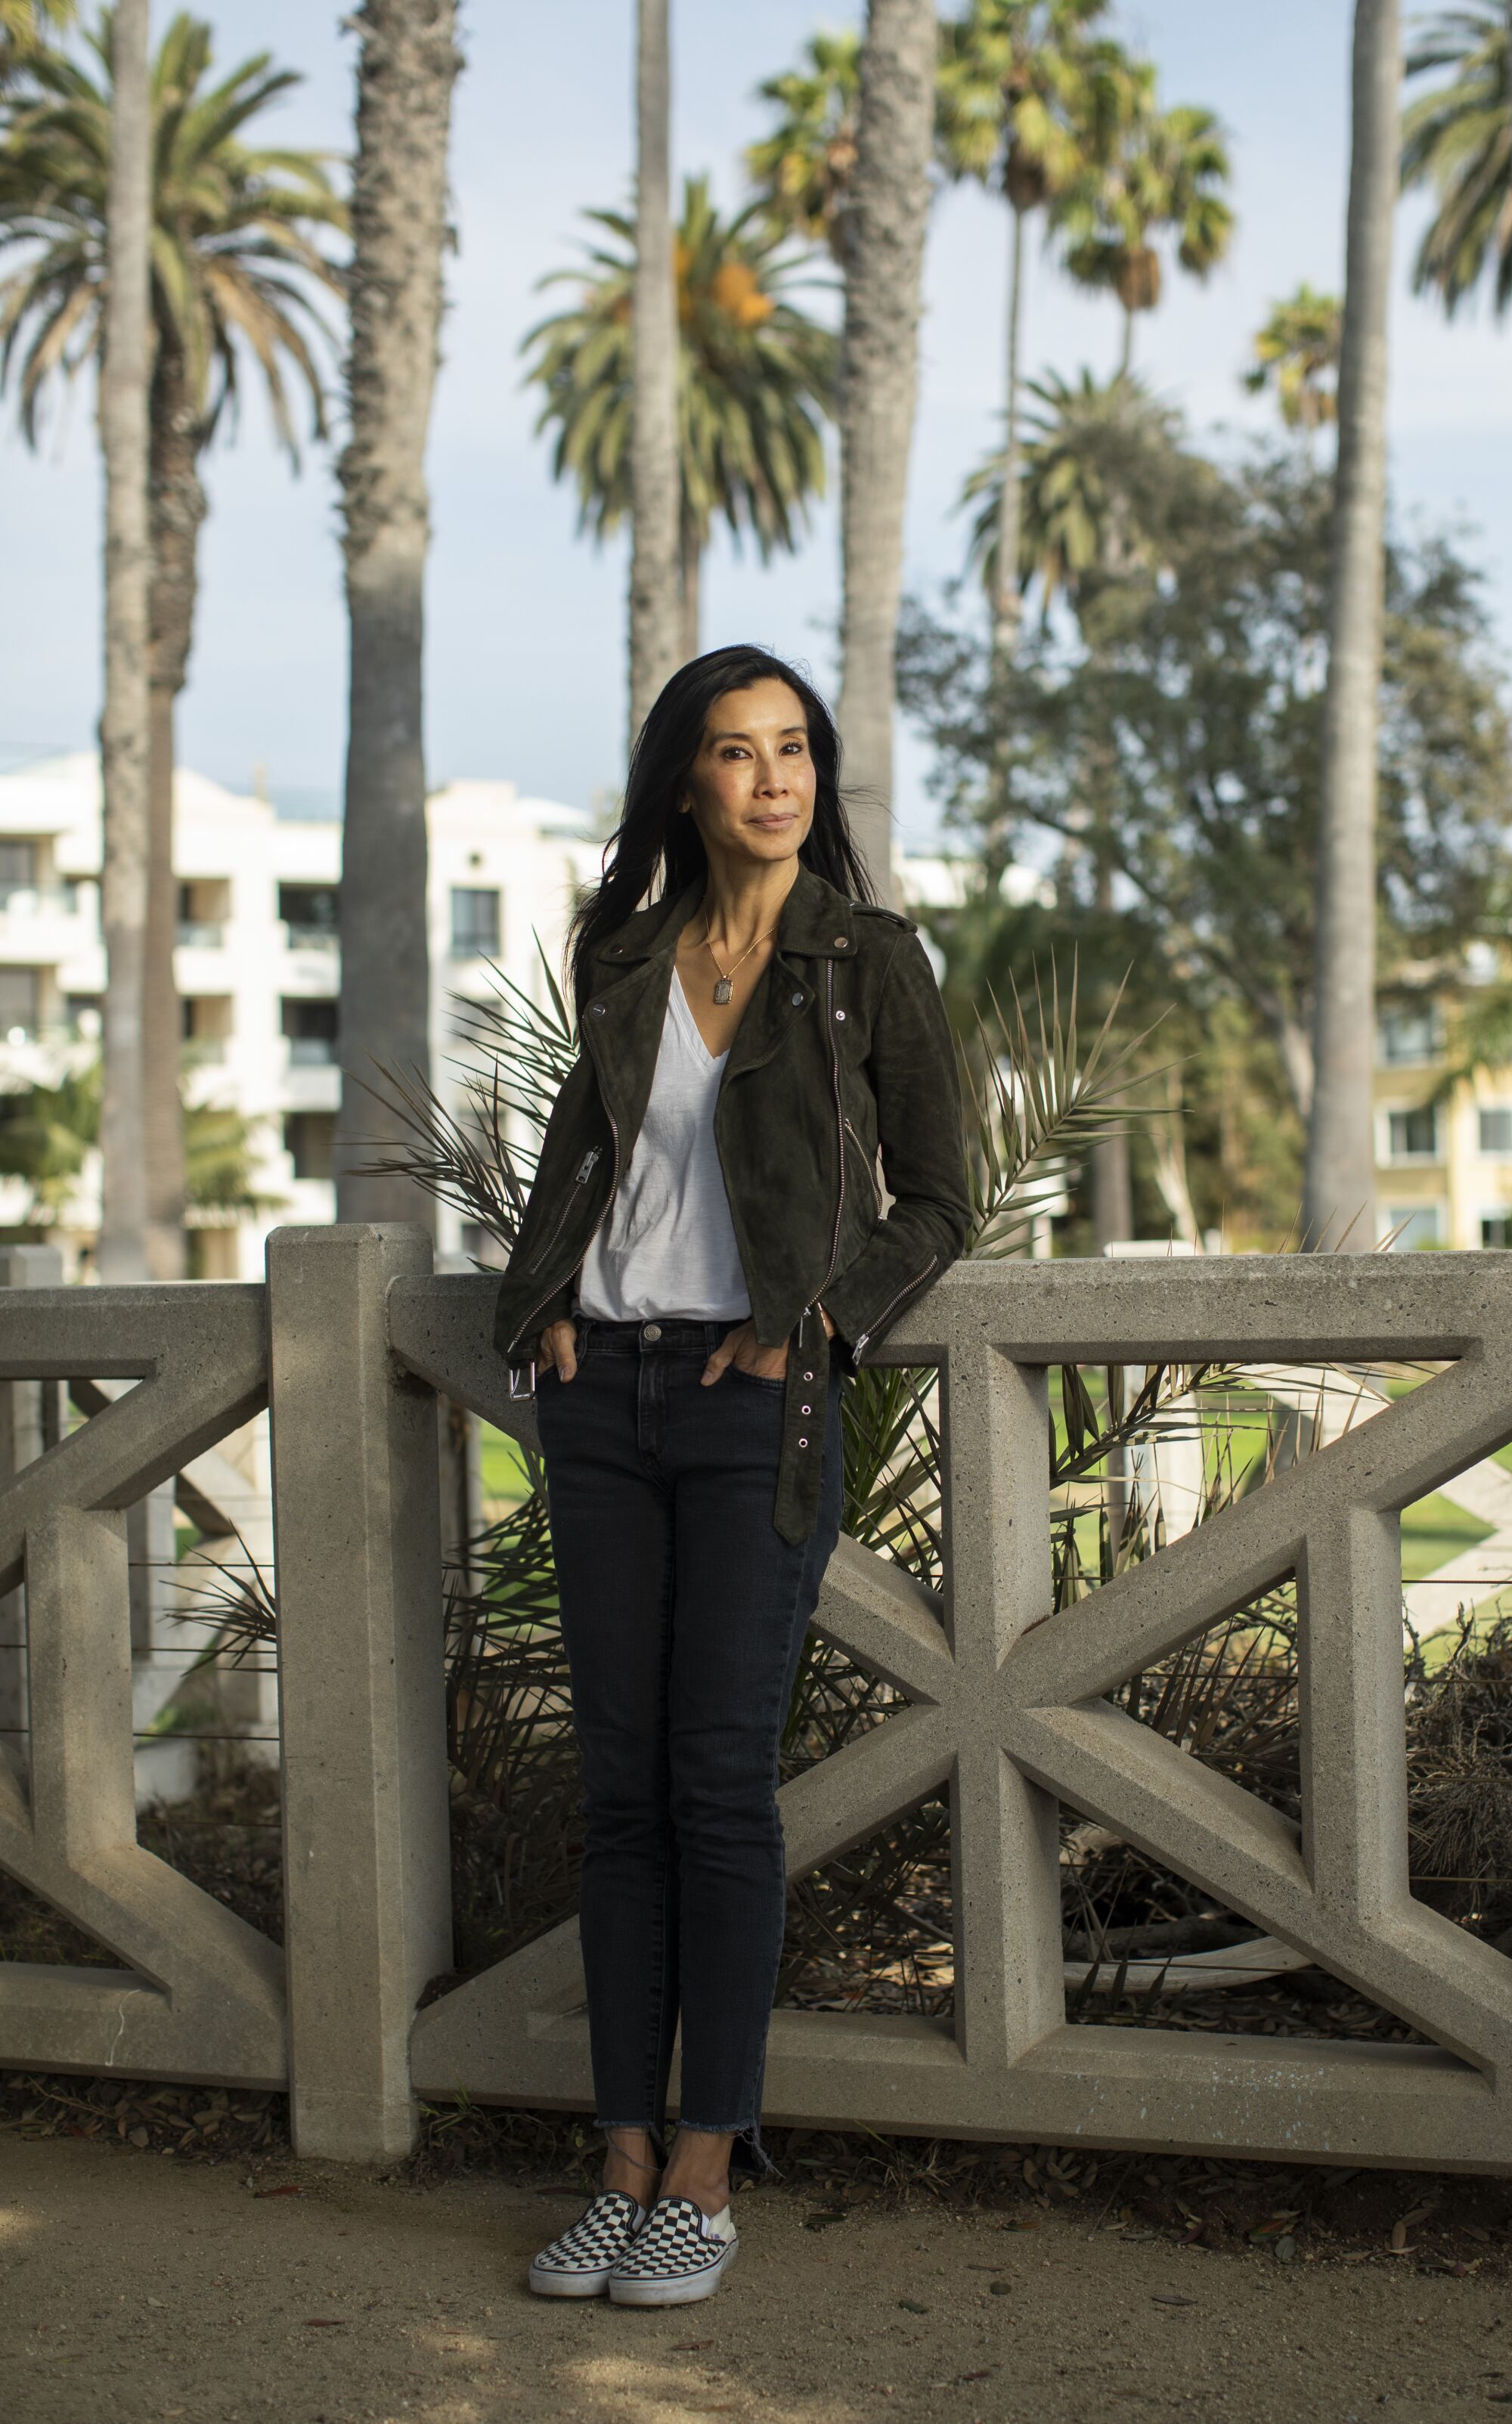 Lisa Ling leans against a decorative concrete railing, with palm trees in the background.